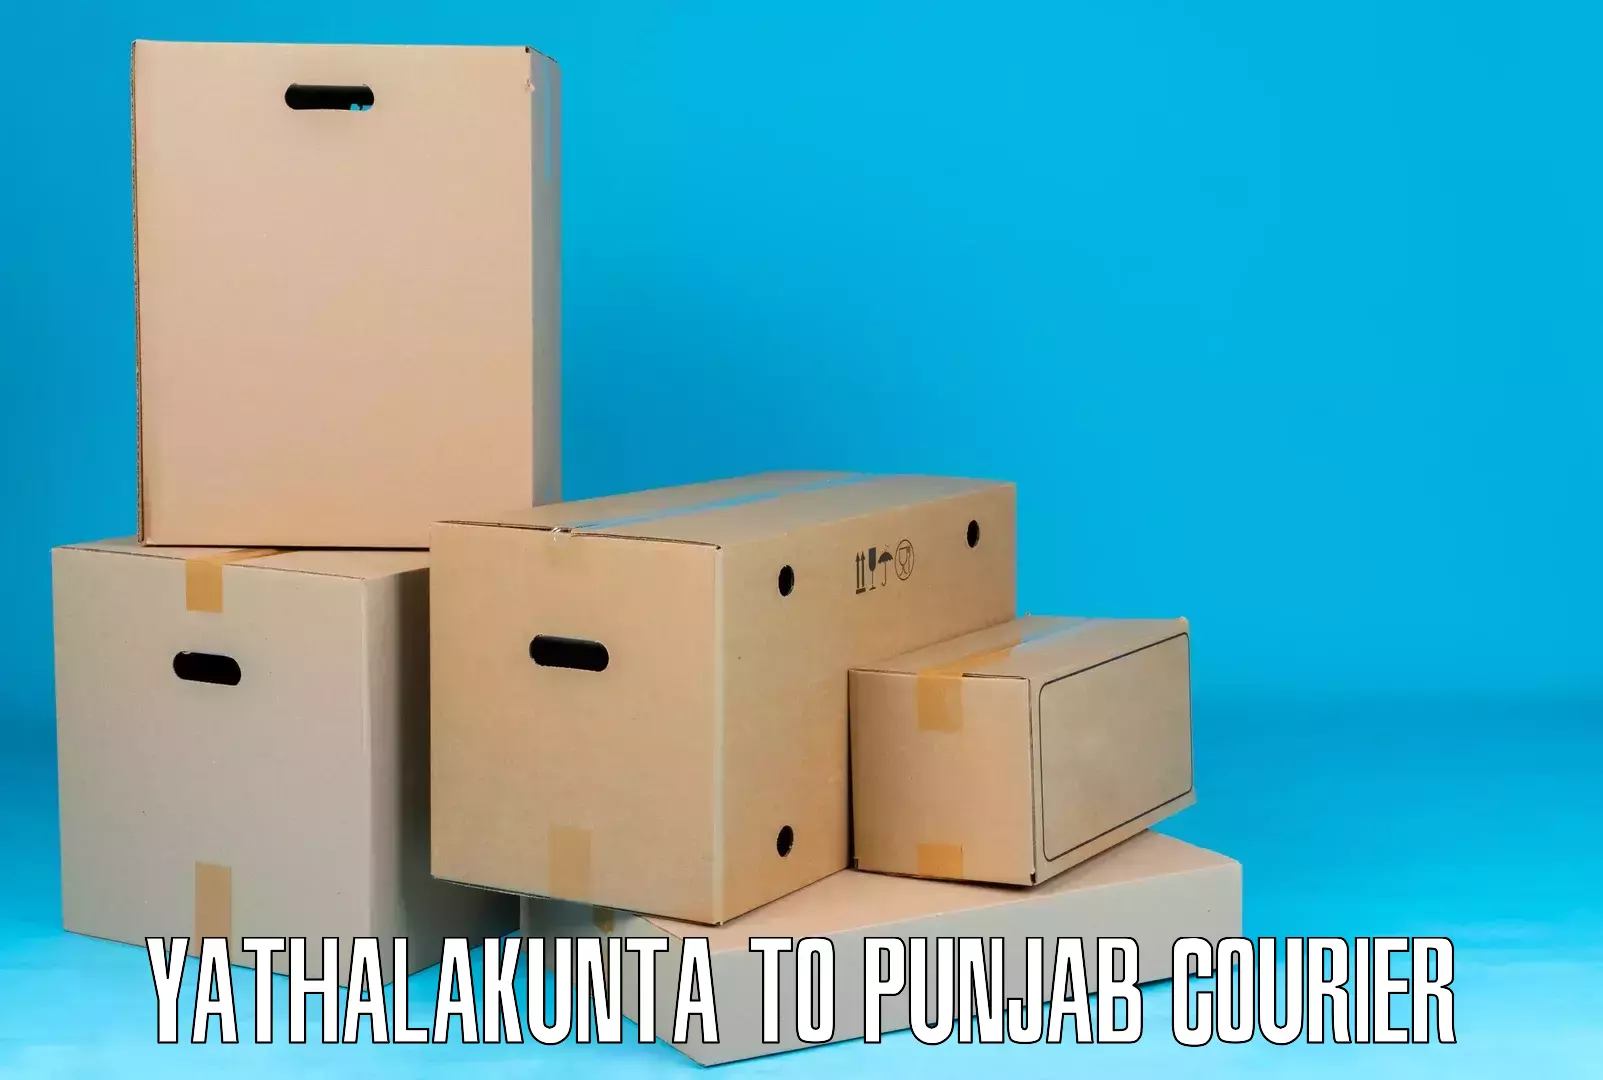 Next-day delivery options in Yathalakunta to Punjab